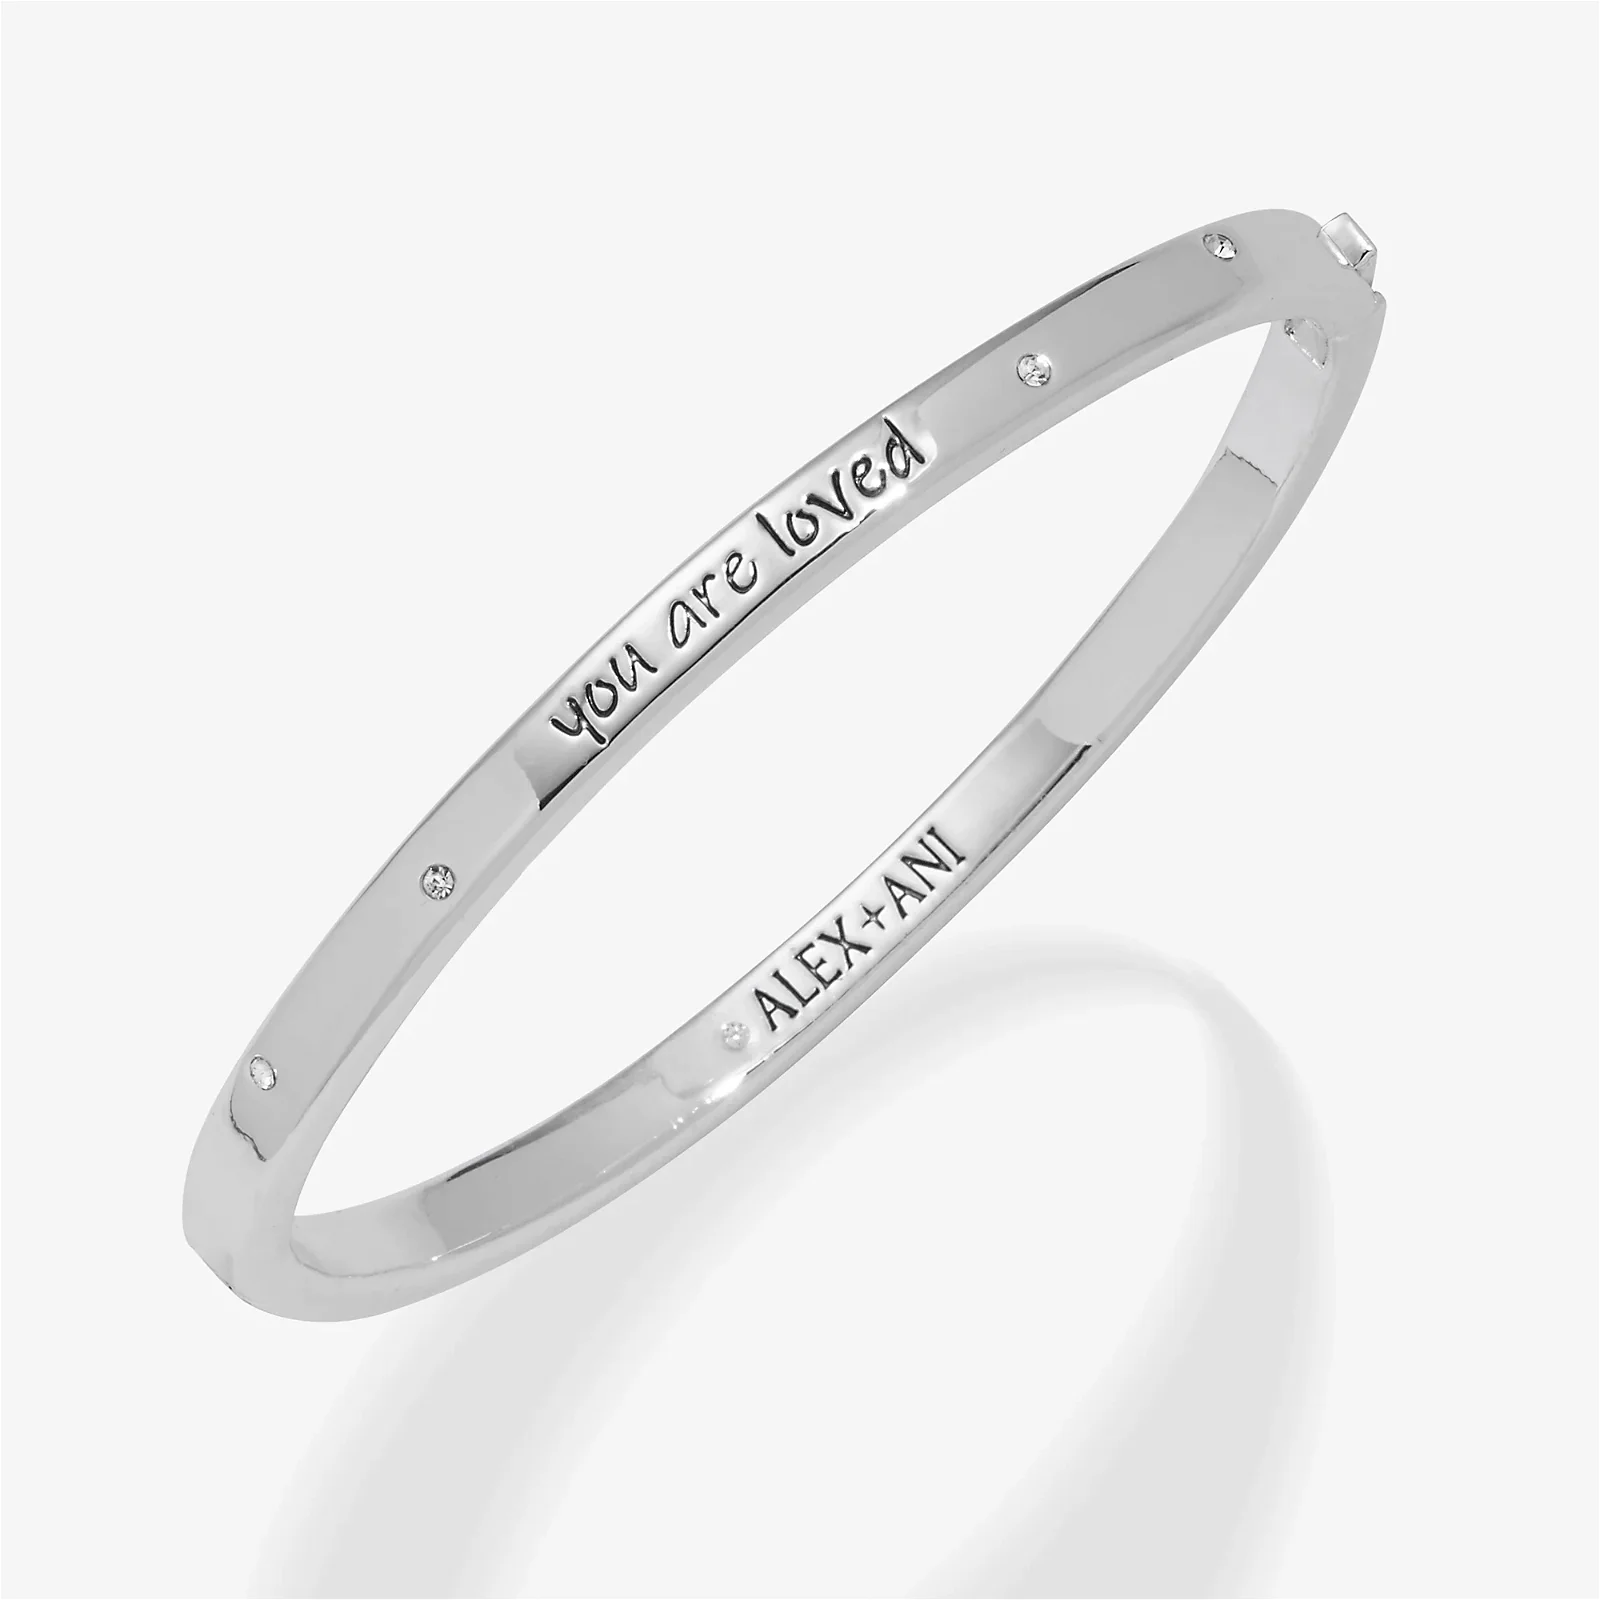 'You Are Loved' Mantra Bangle